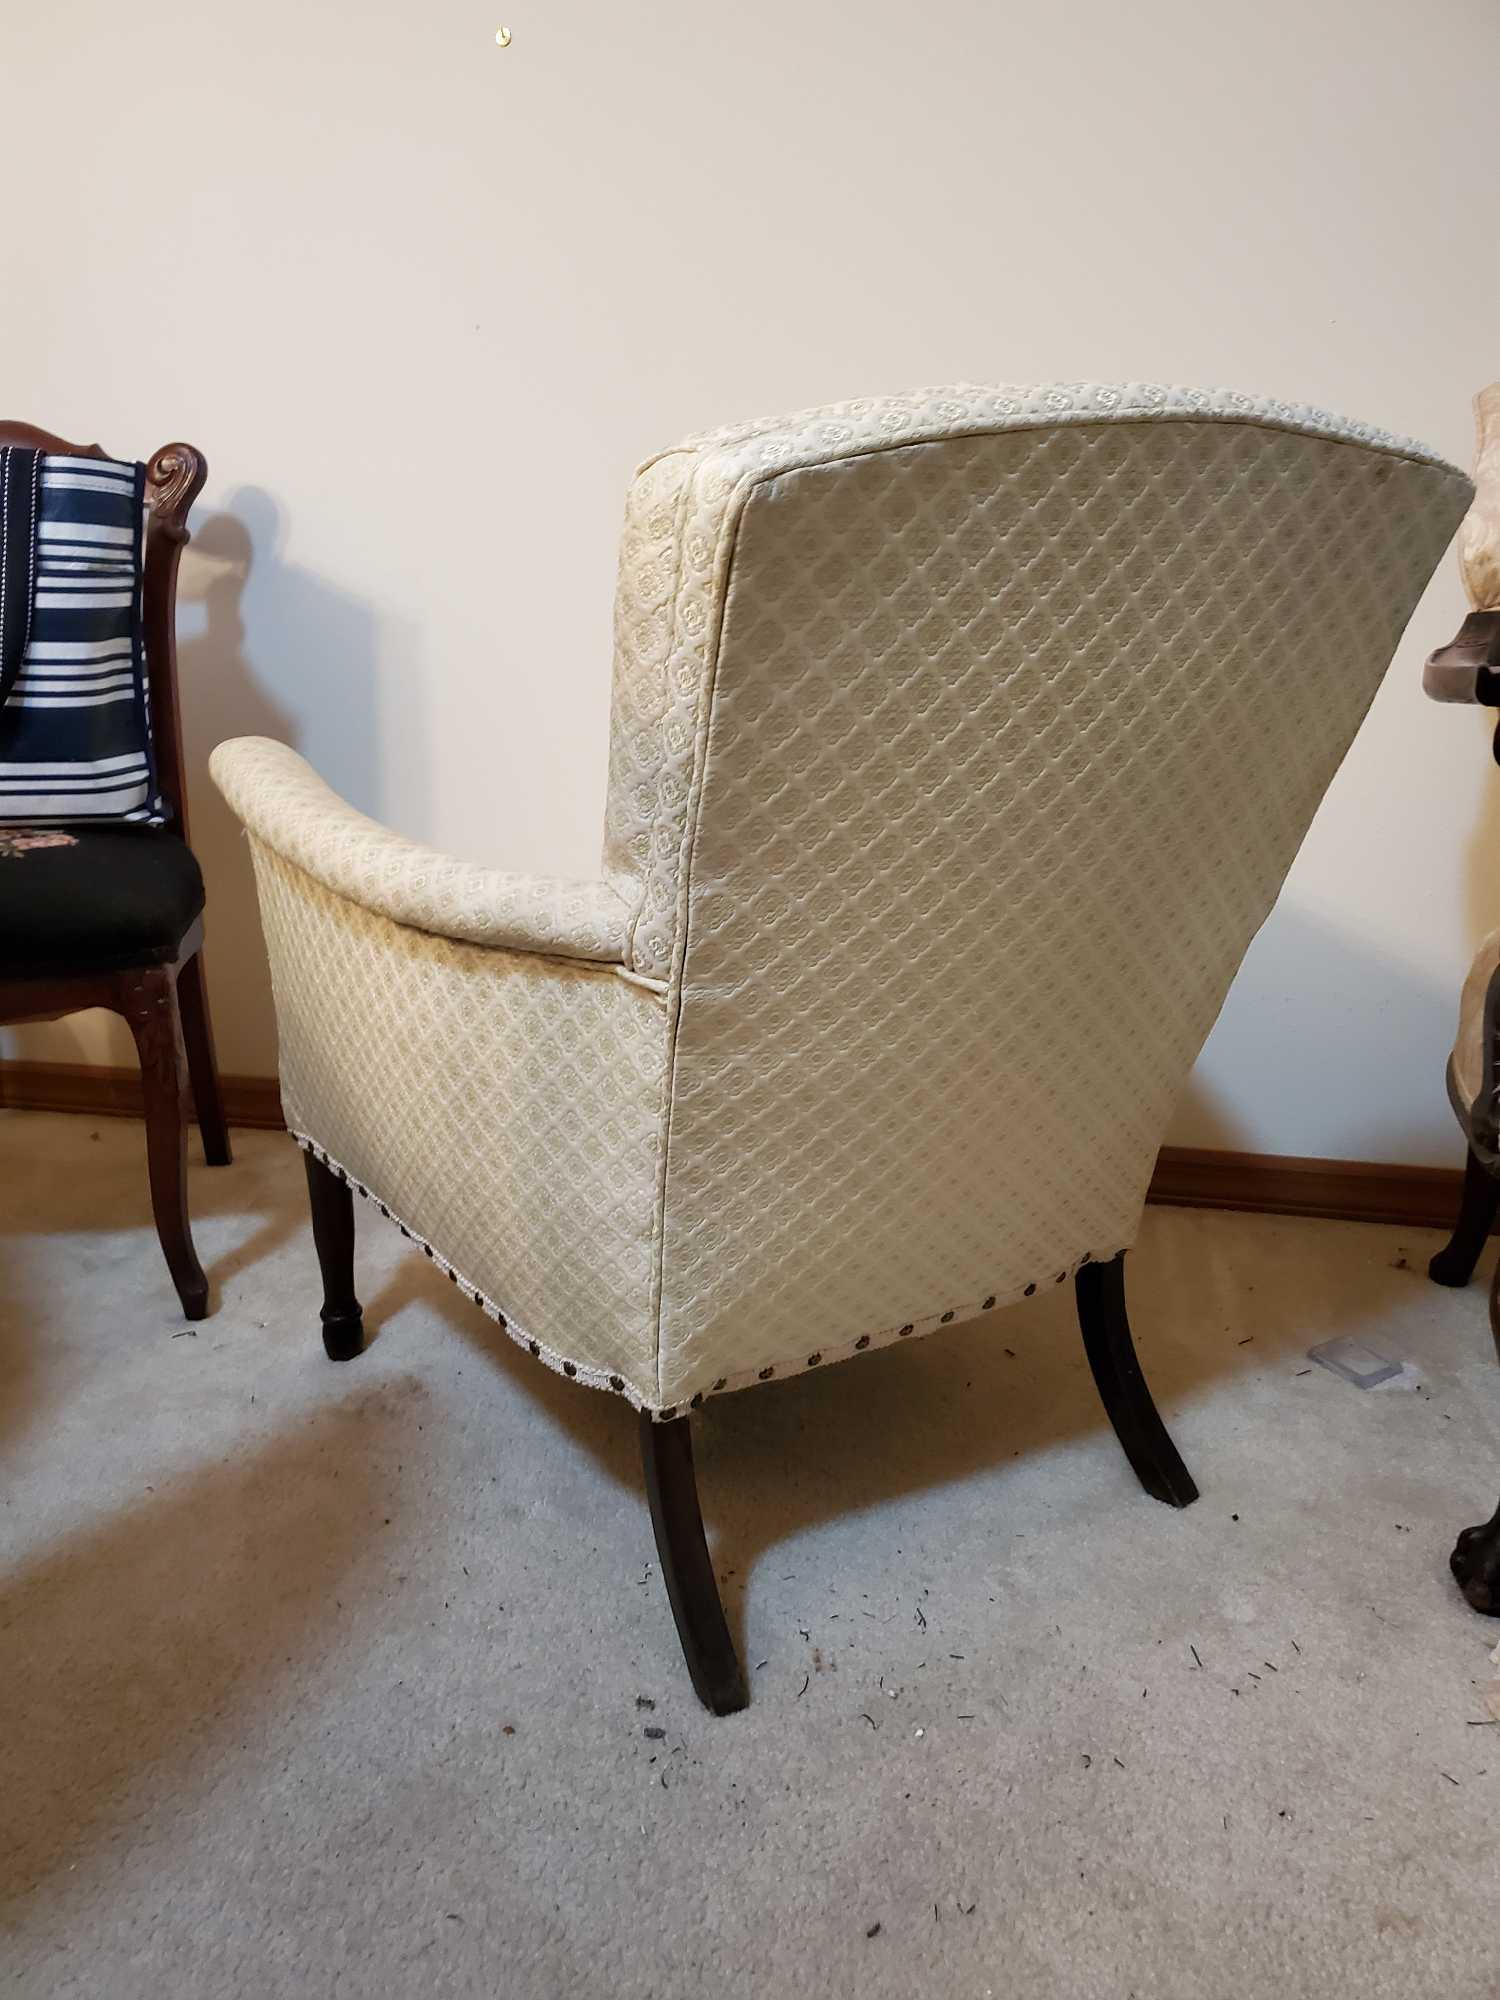 Vintage armchair, thick cream upolstery